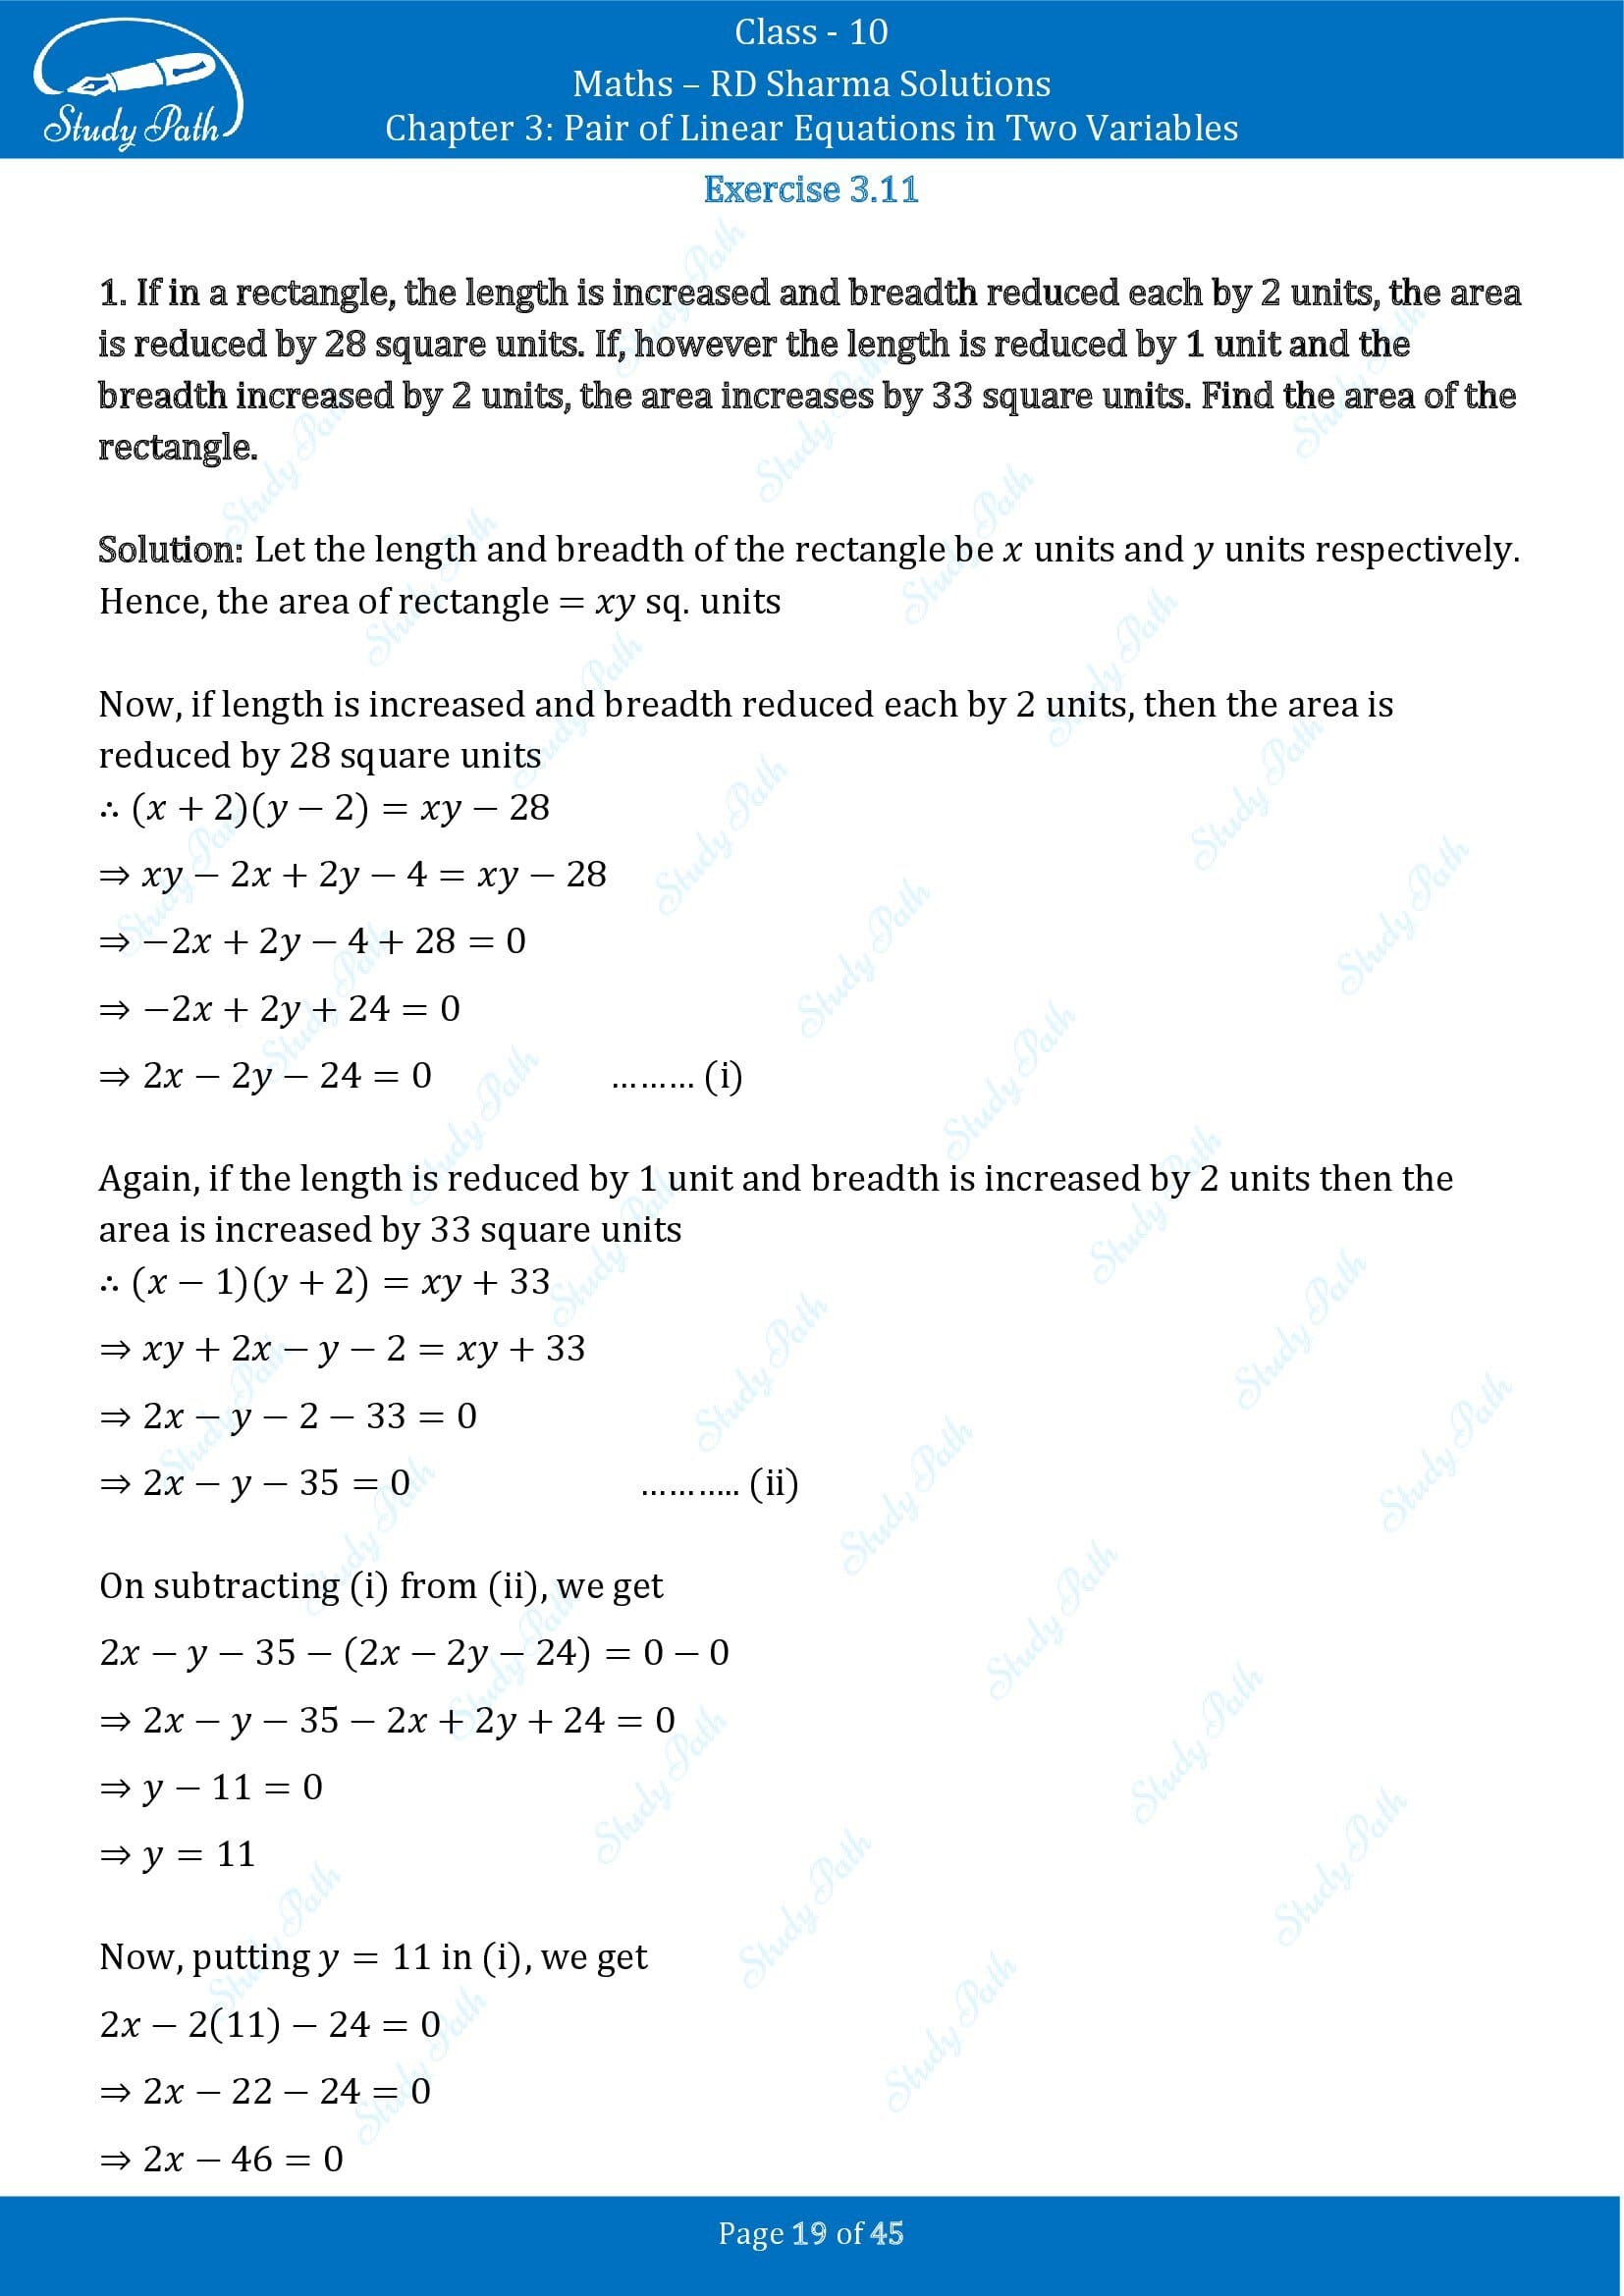 RD Sharma Solutions Class 10 Chapter 3 Pair of Linear Equations in Two Variables Exercise 3.11 00019